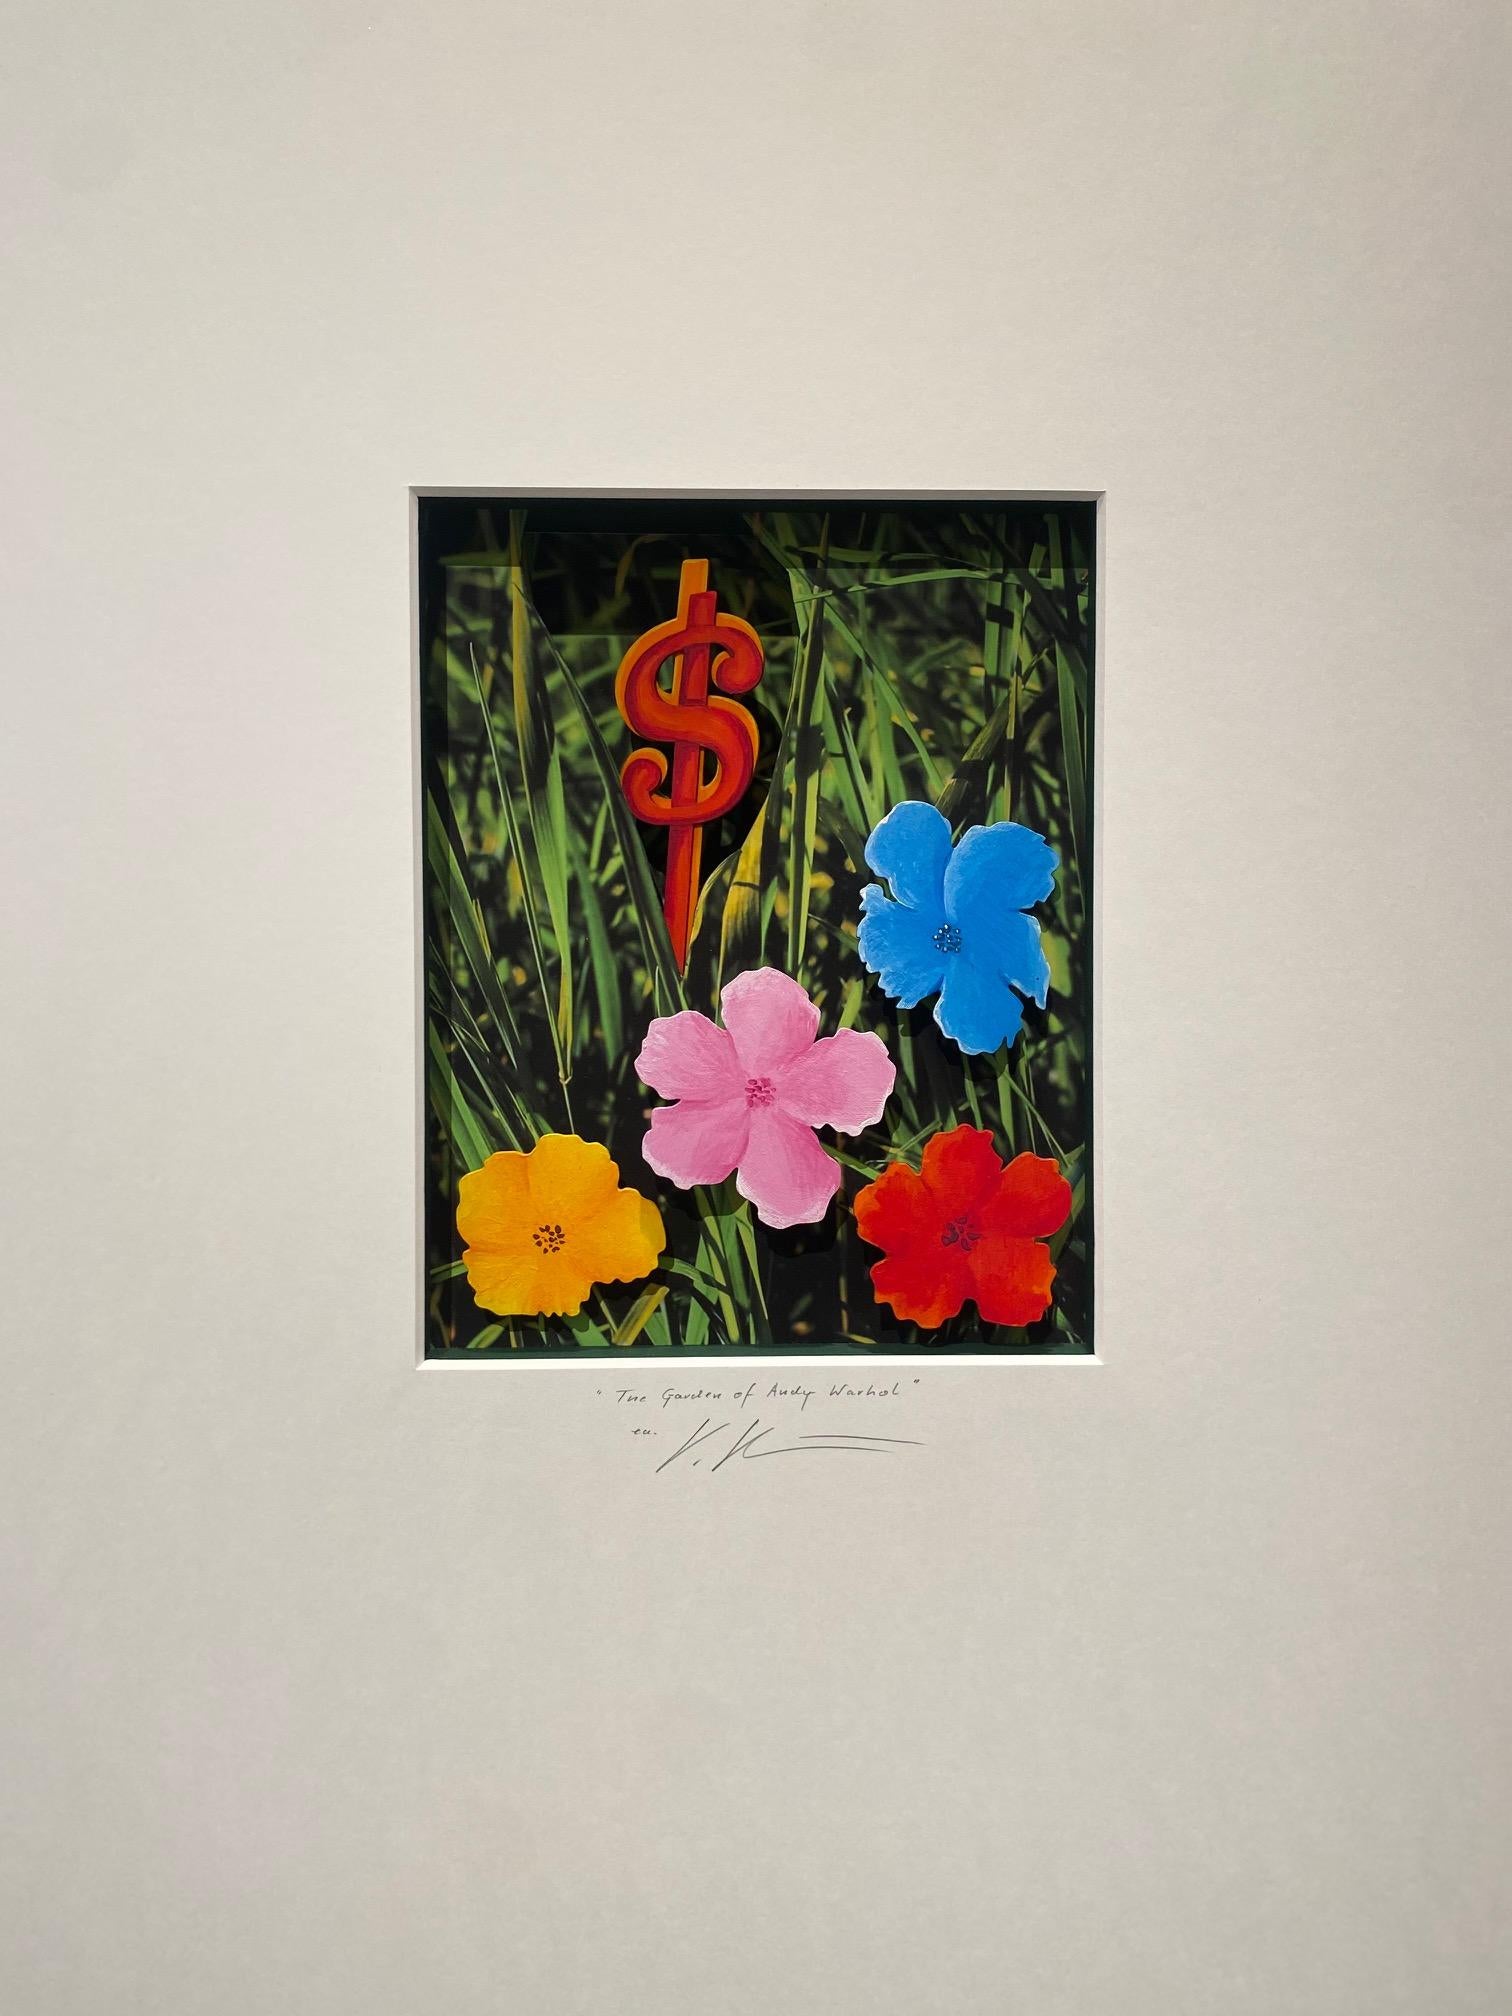 "Garden of Andy Warhol" is an original mixed media artwork by Volker Kuhn. The work is hand-signed and numbered by the artist below the artwork on the mat. It is a witty reference to the art of Andy Warhol formed as a hand-made assemblage carved out